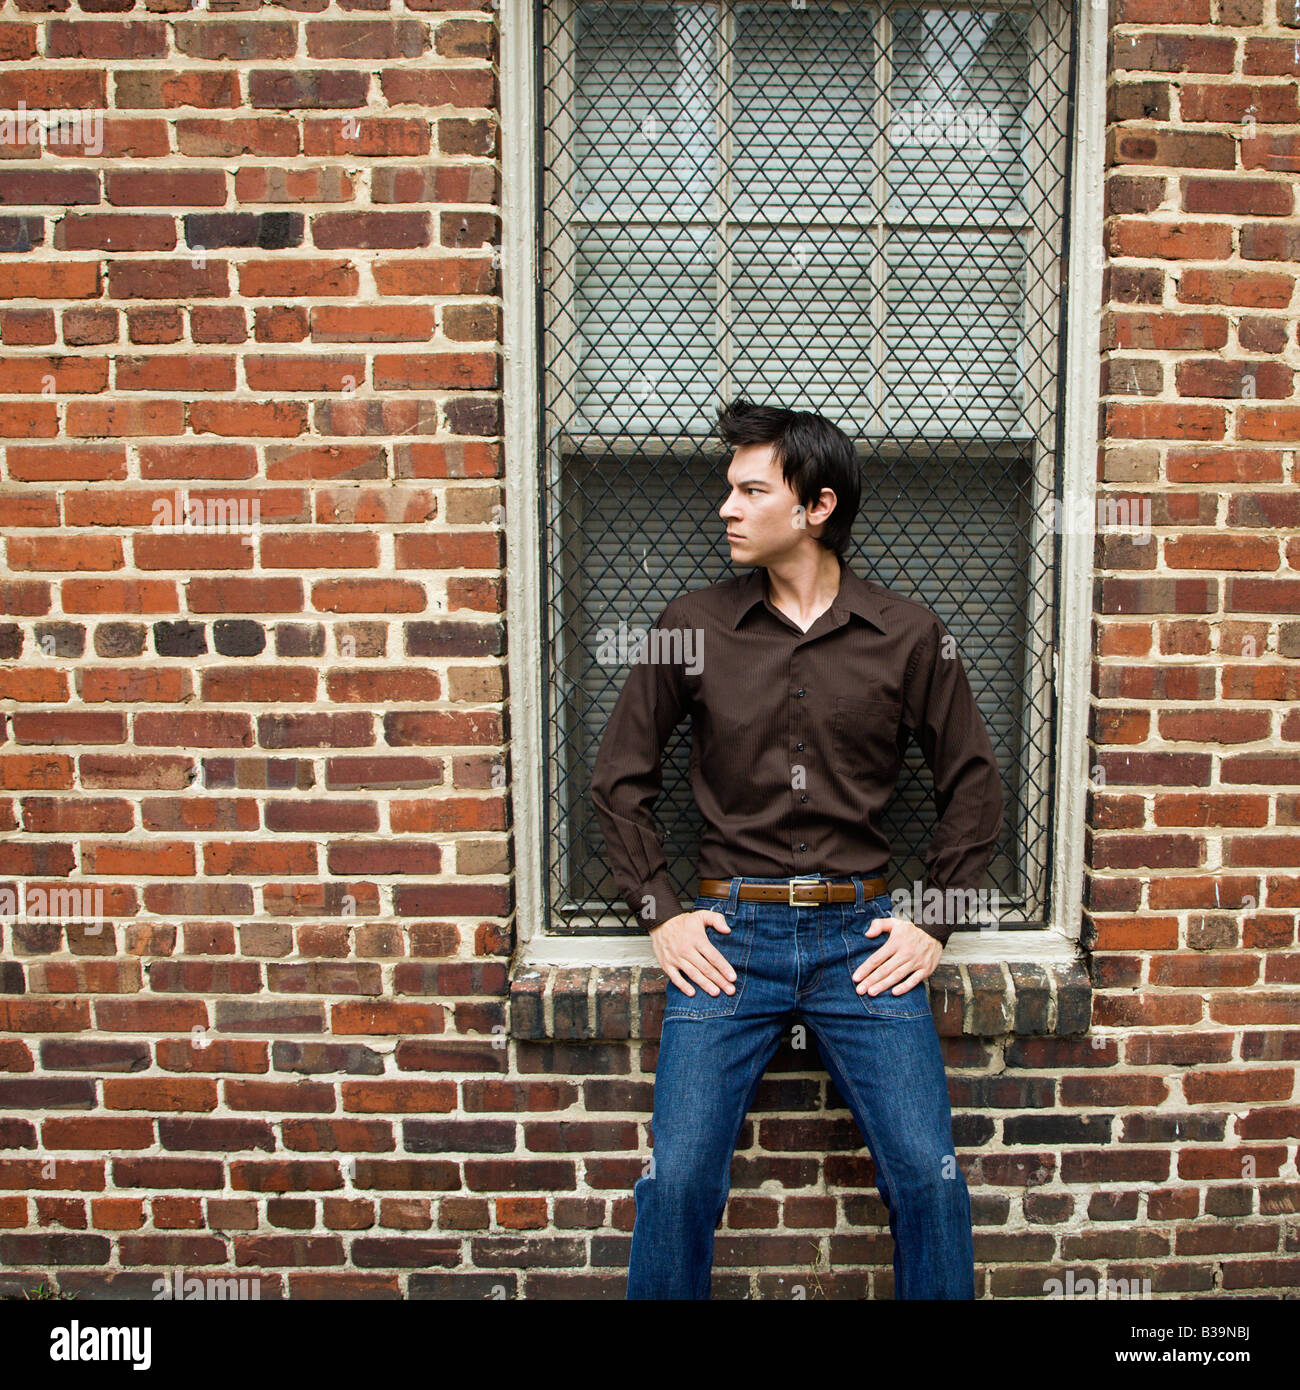 Asian man standing and leaning against window and brick wall Stock Photo